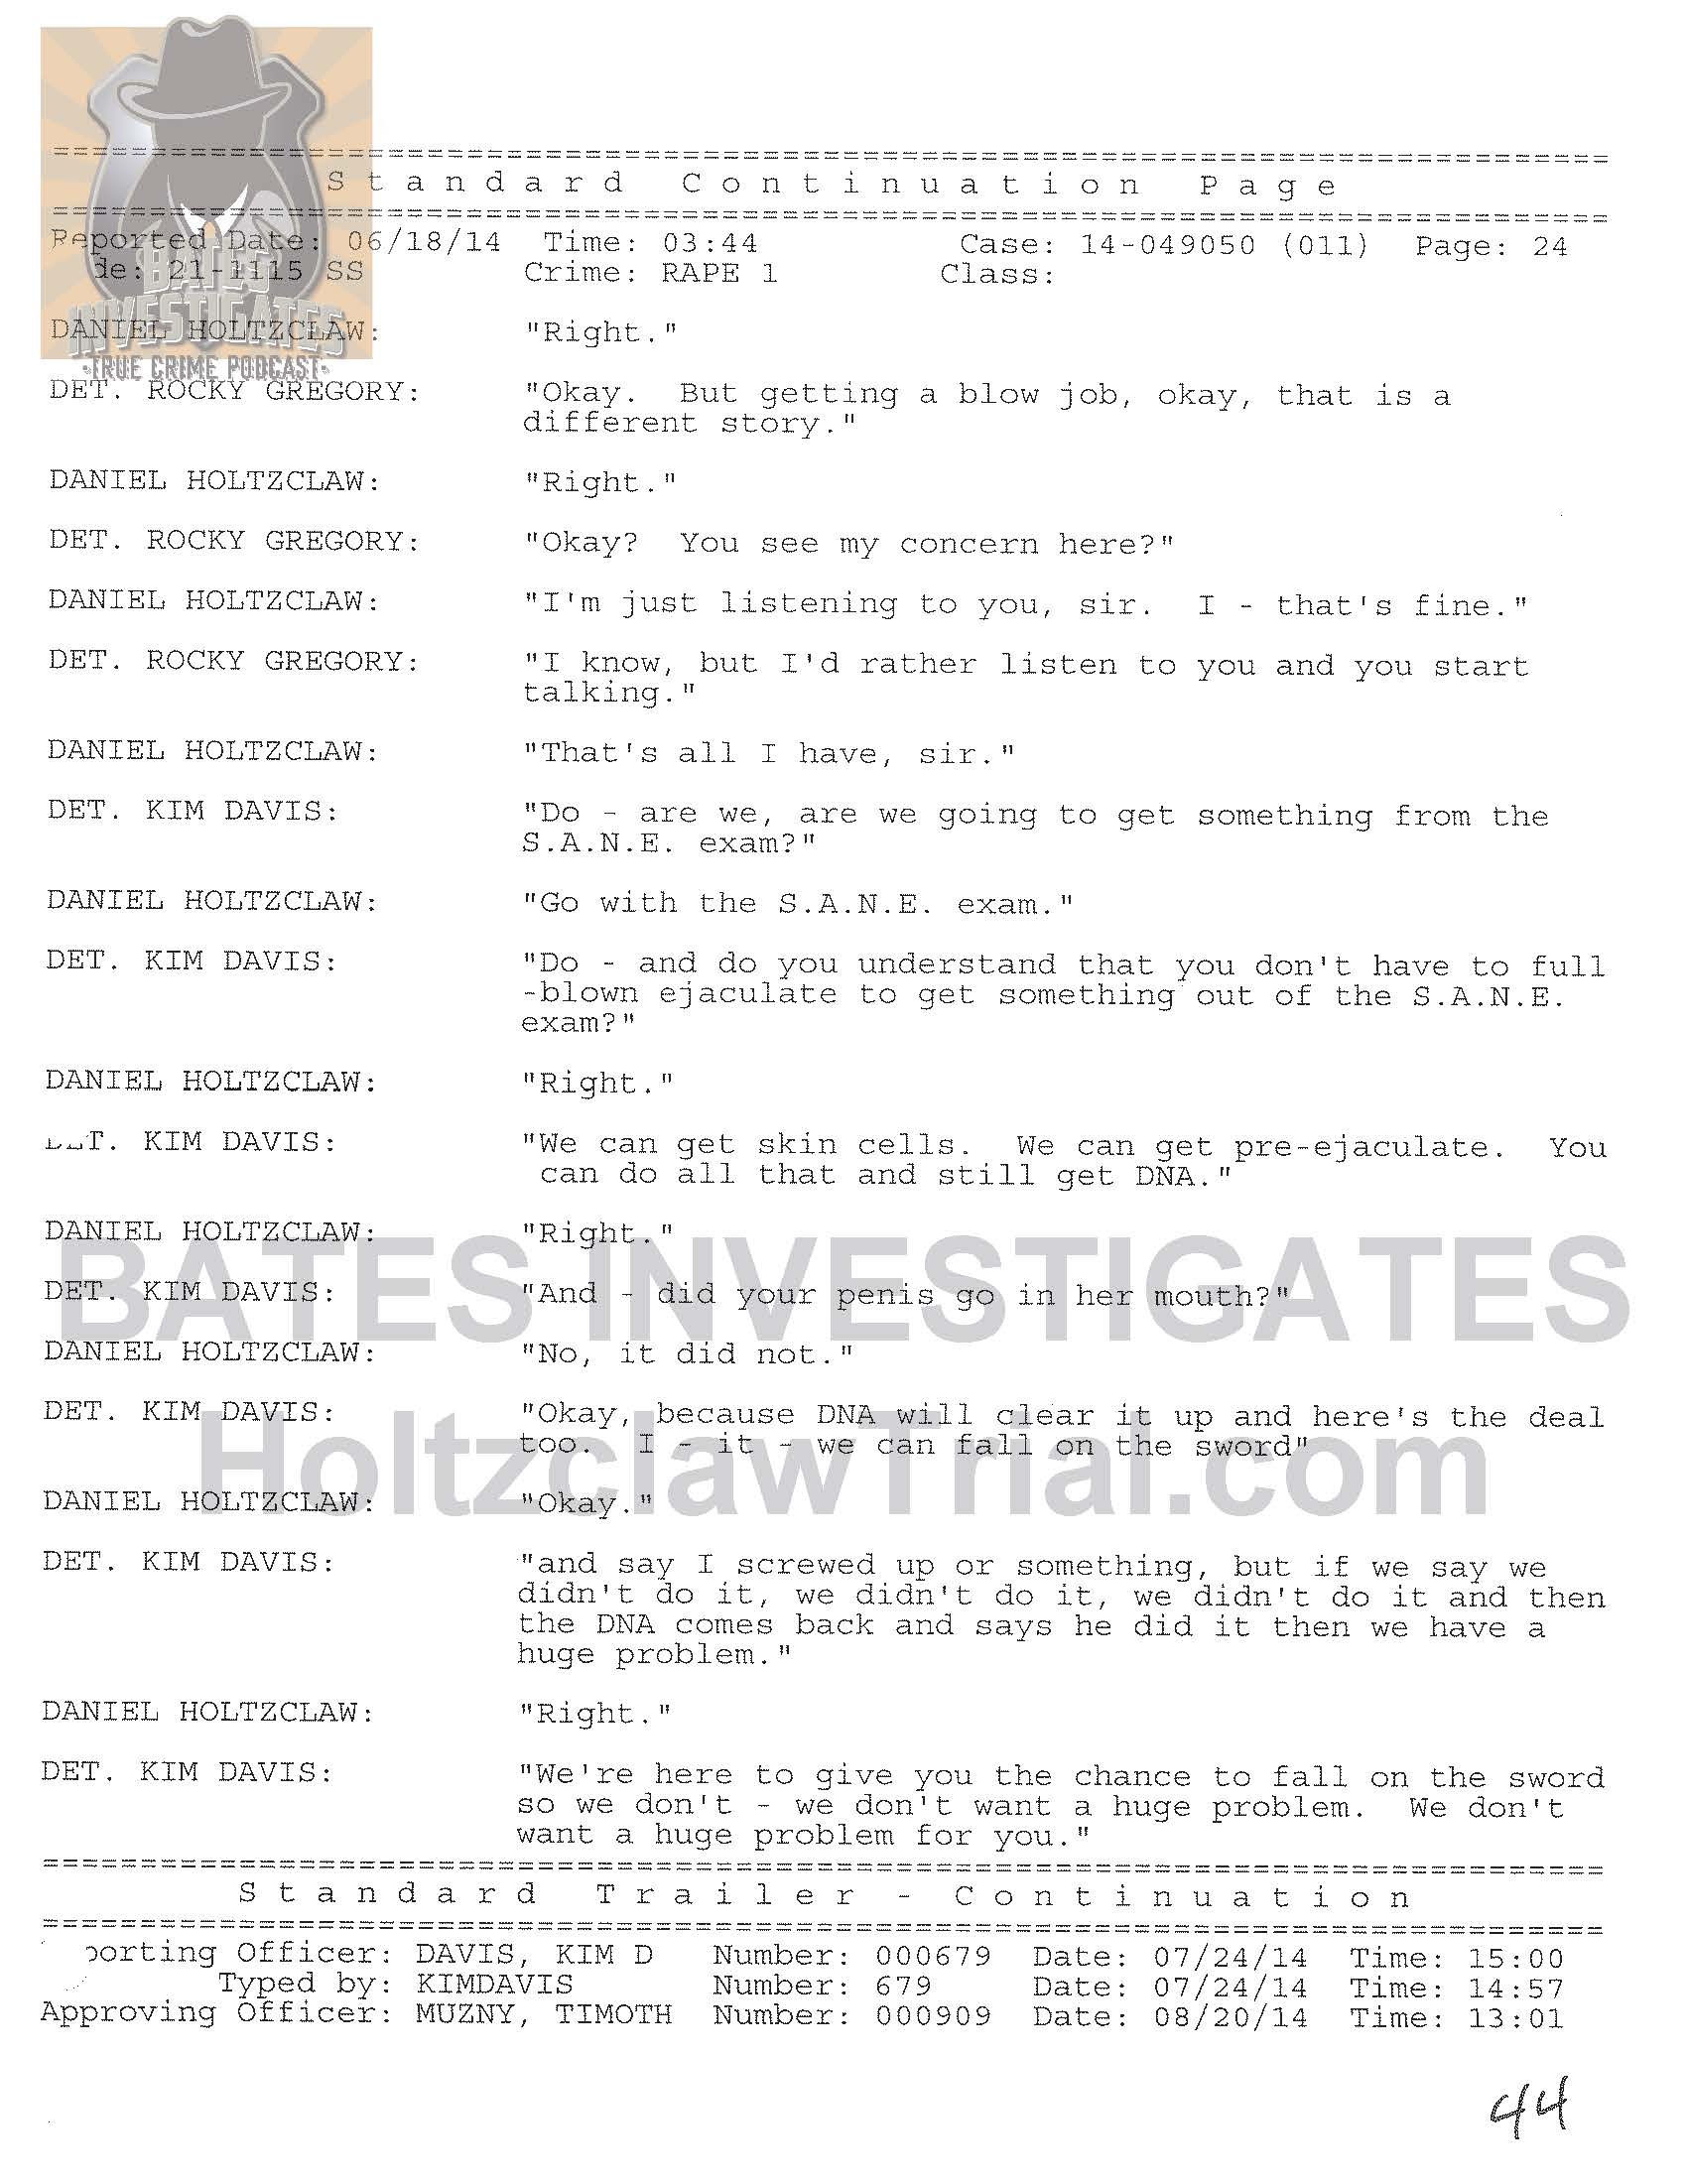 Holtzclaw Interrogation Transcript - Ep02 Redacted_Page_24.jpg